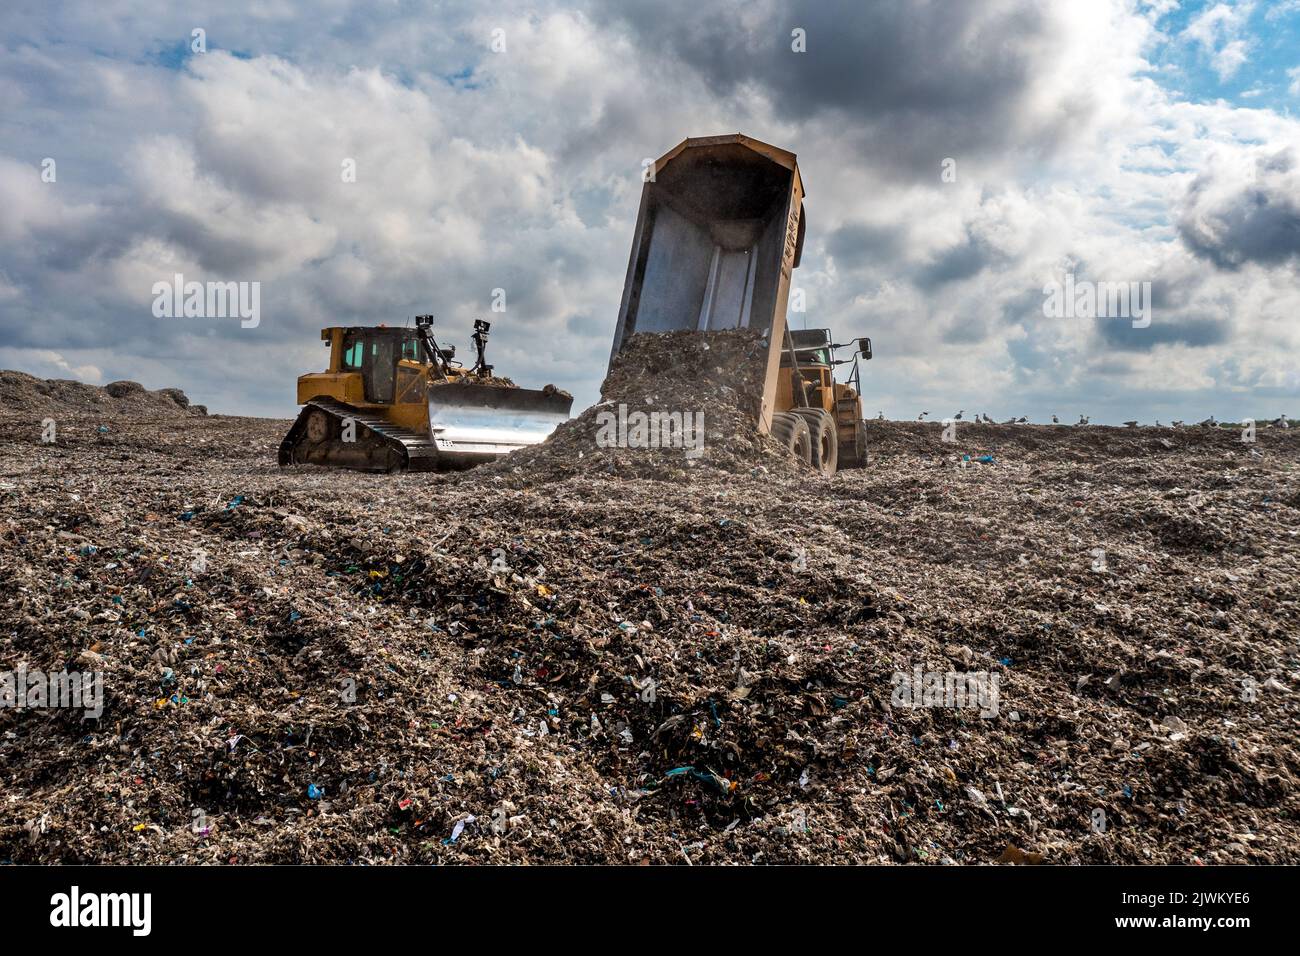 A dumper truck on a large waste management landfill site dumping rubbish in an environmental issue image Stock Photo